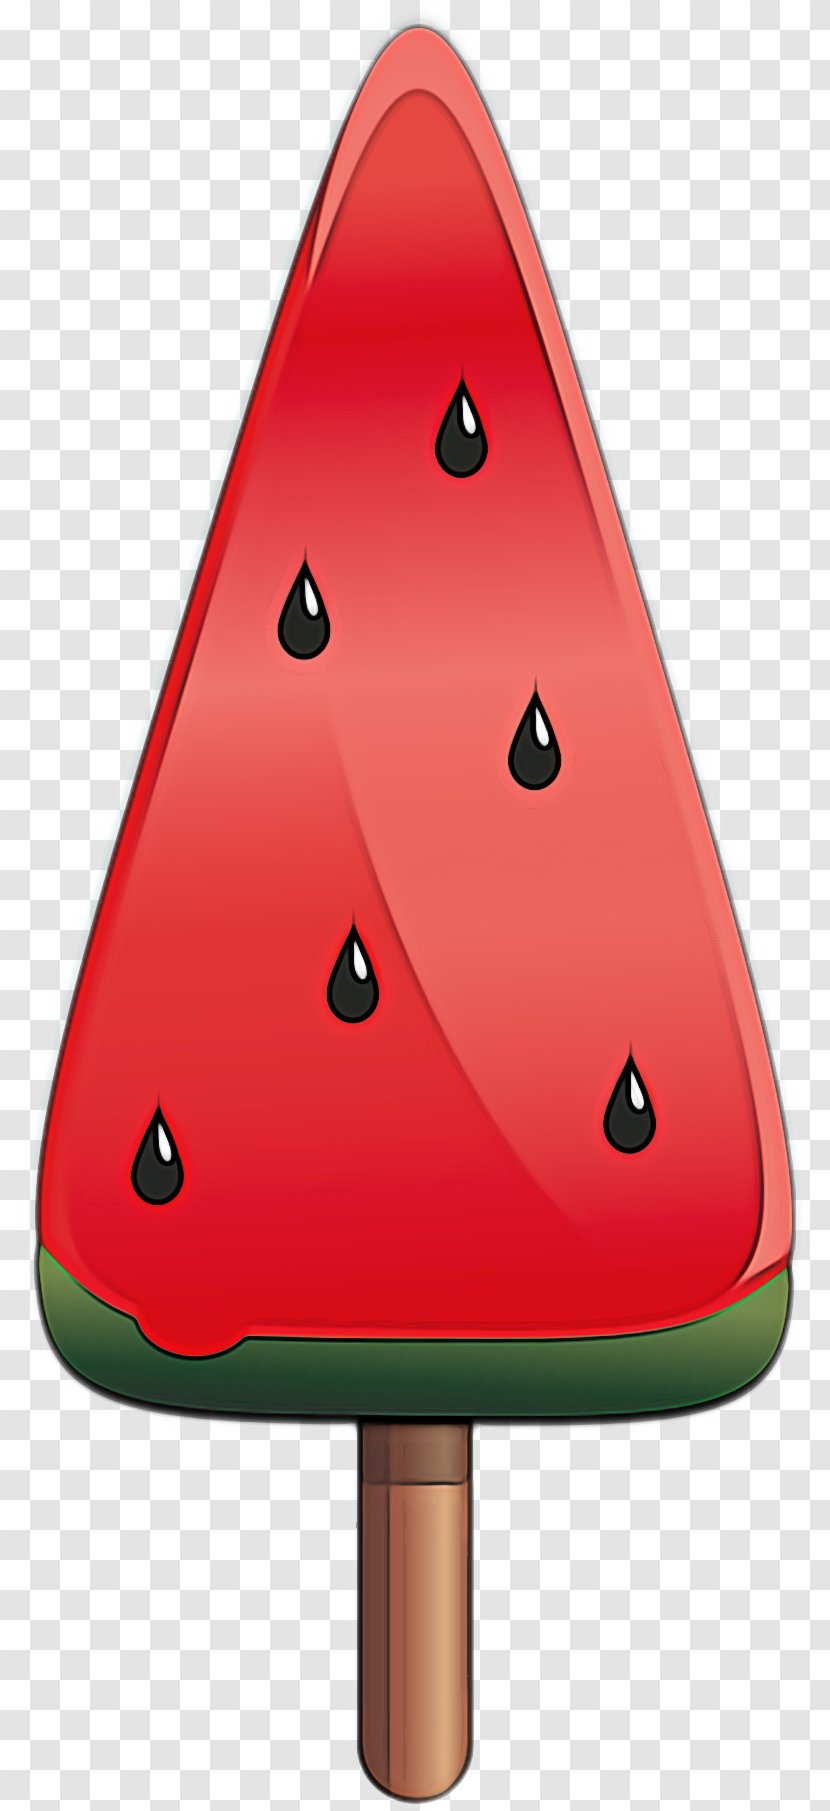 Watermelon - Signage Climbing Hold Transparent PNG